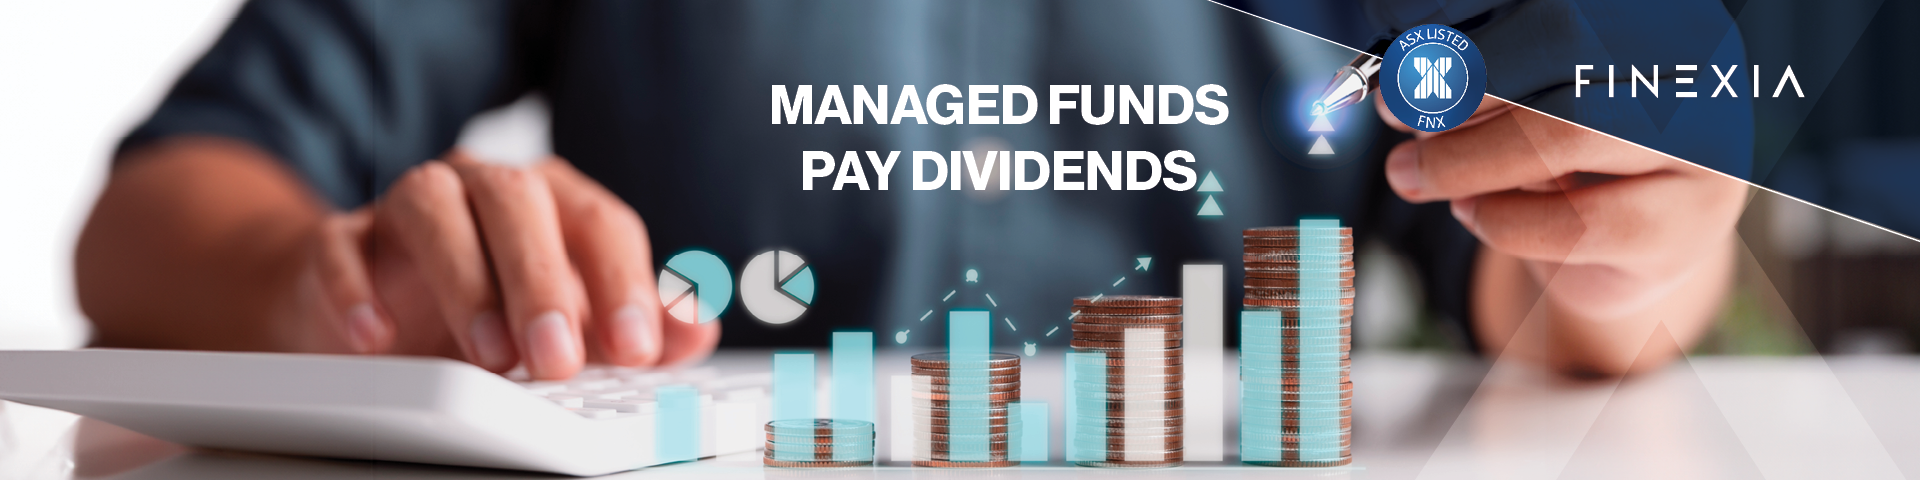 7 Key Insights on Managed Funds and Their Dividend Payouts